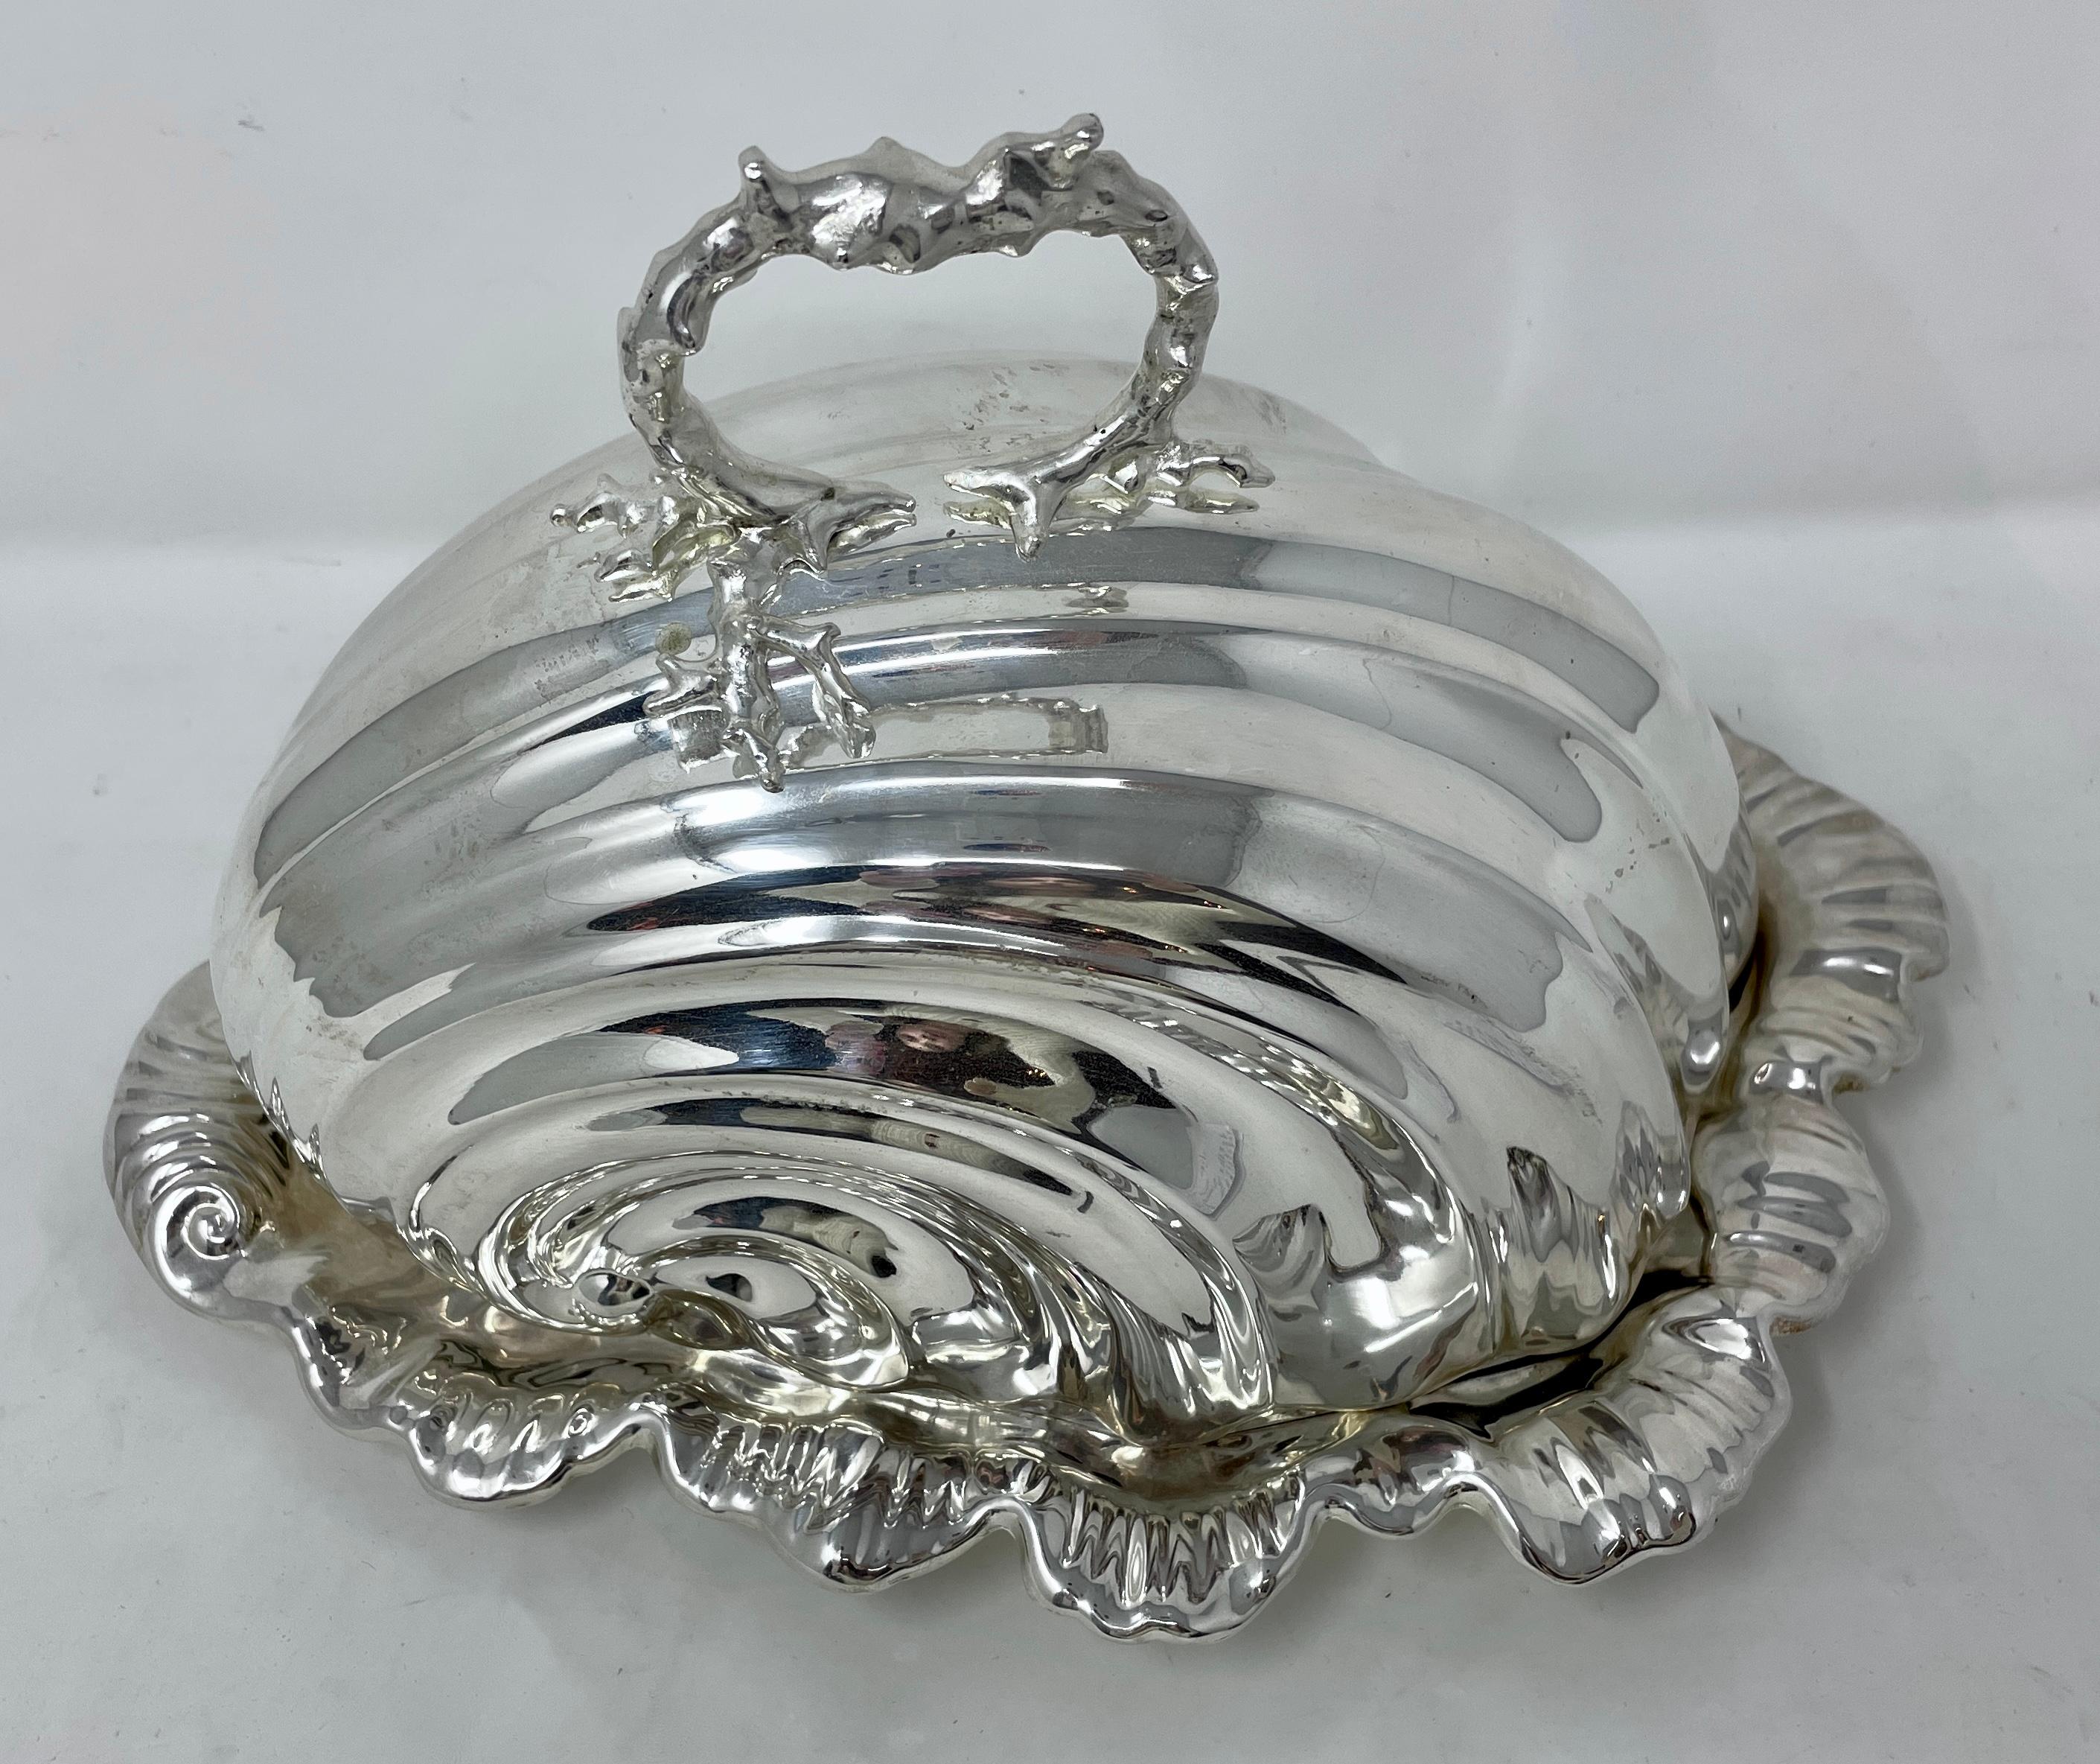 Antique English silver-plated 